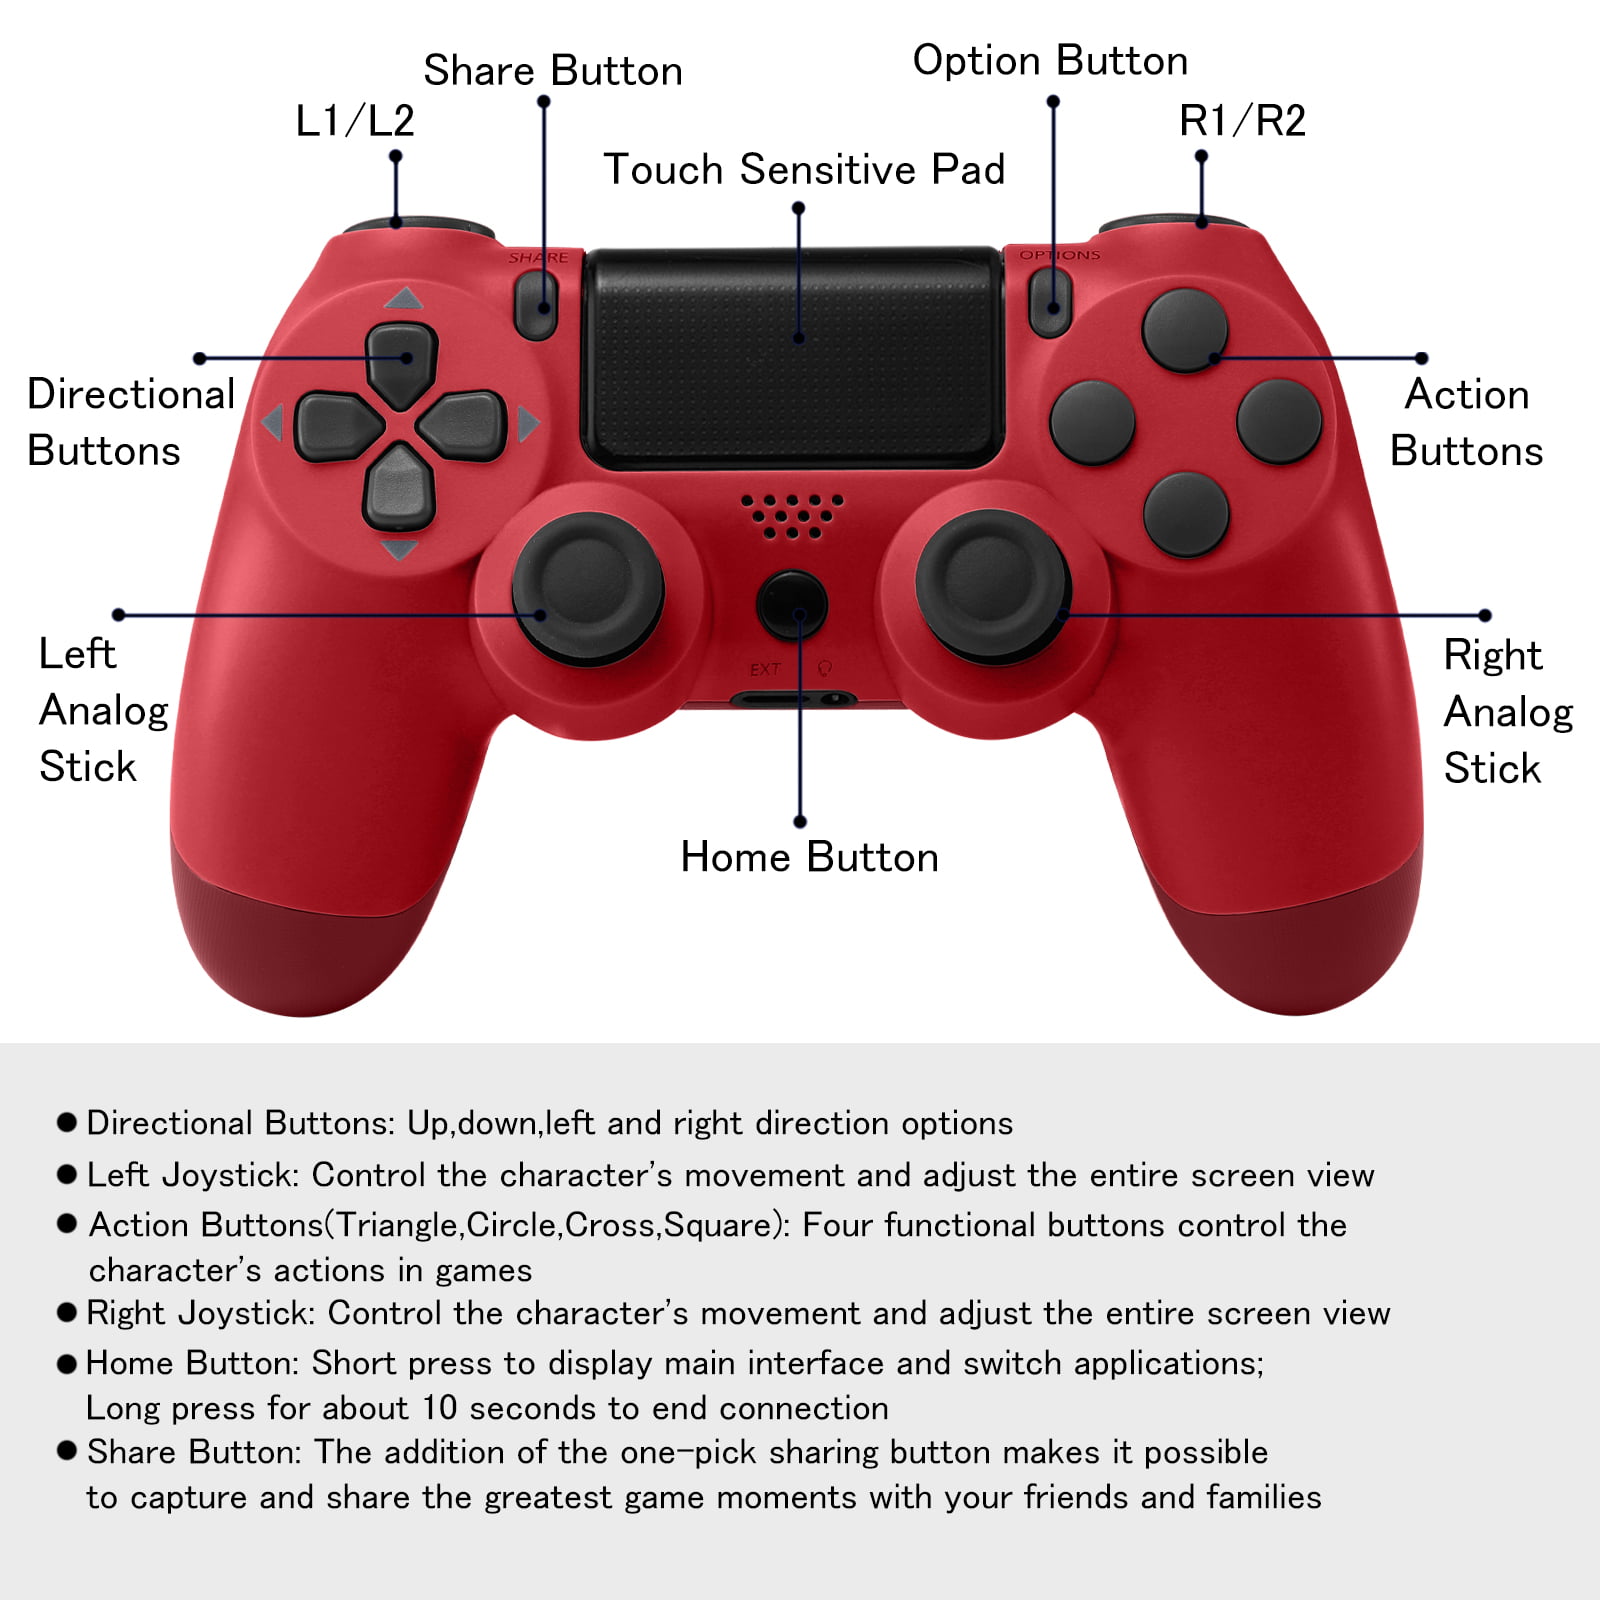 PLAYSTATION buttons. Left Analog Stick. Control RB 2. Press options